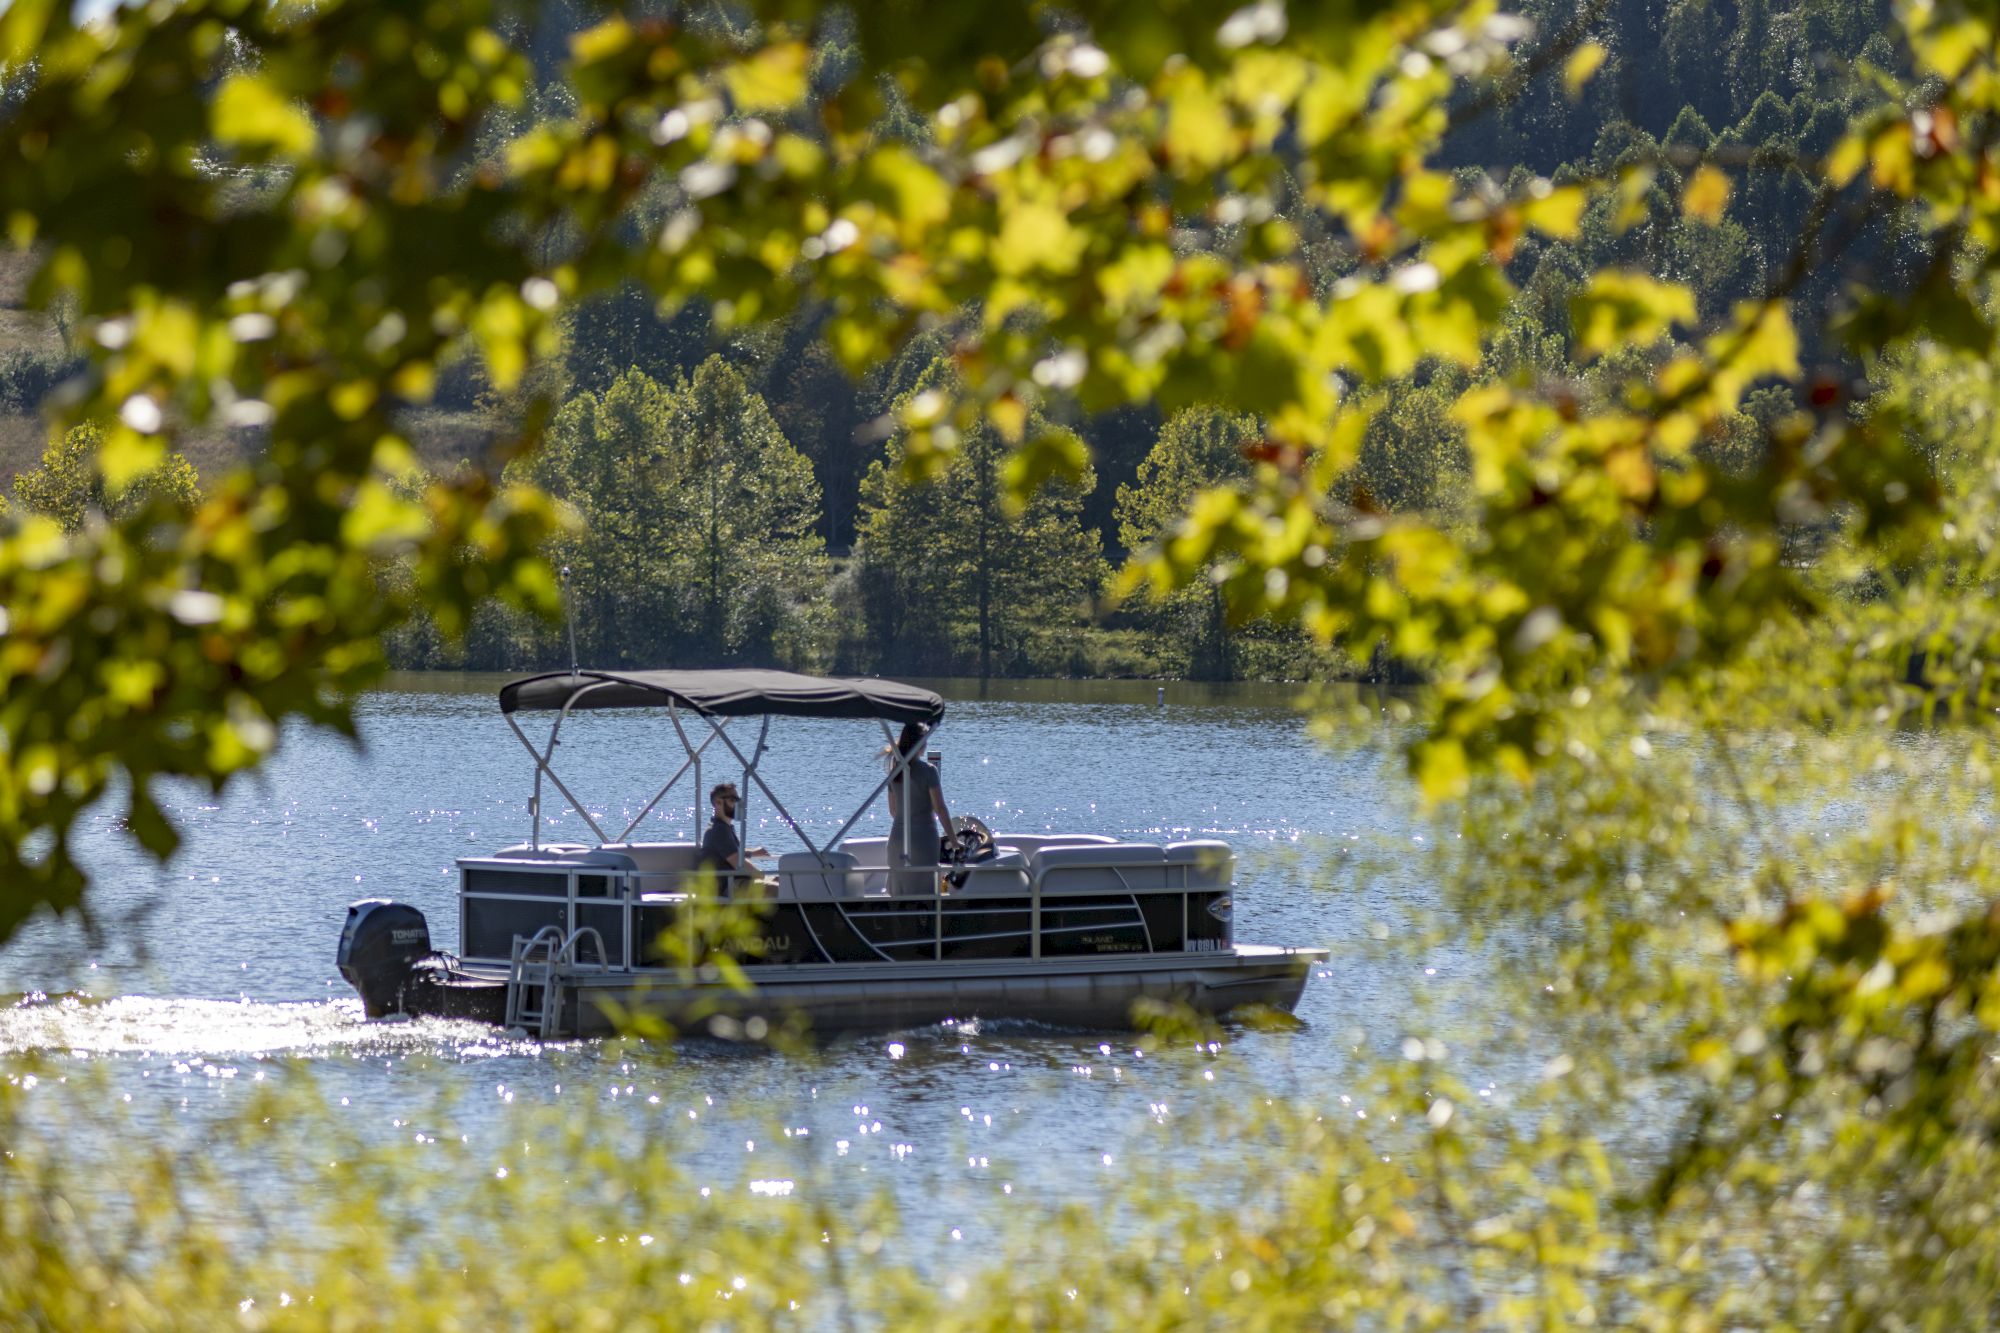 A small boat with people on board is cruising on a lake, surrounded by lush green trees, under bright sunlight.